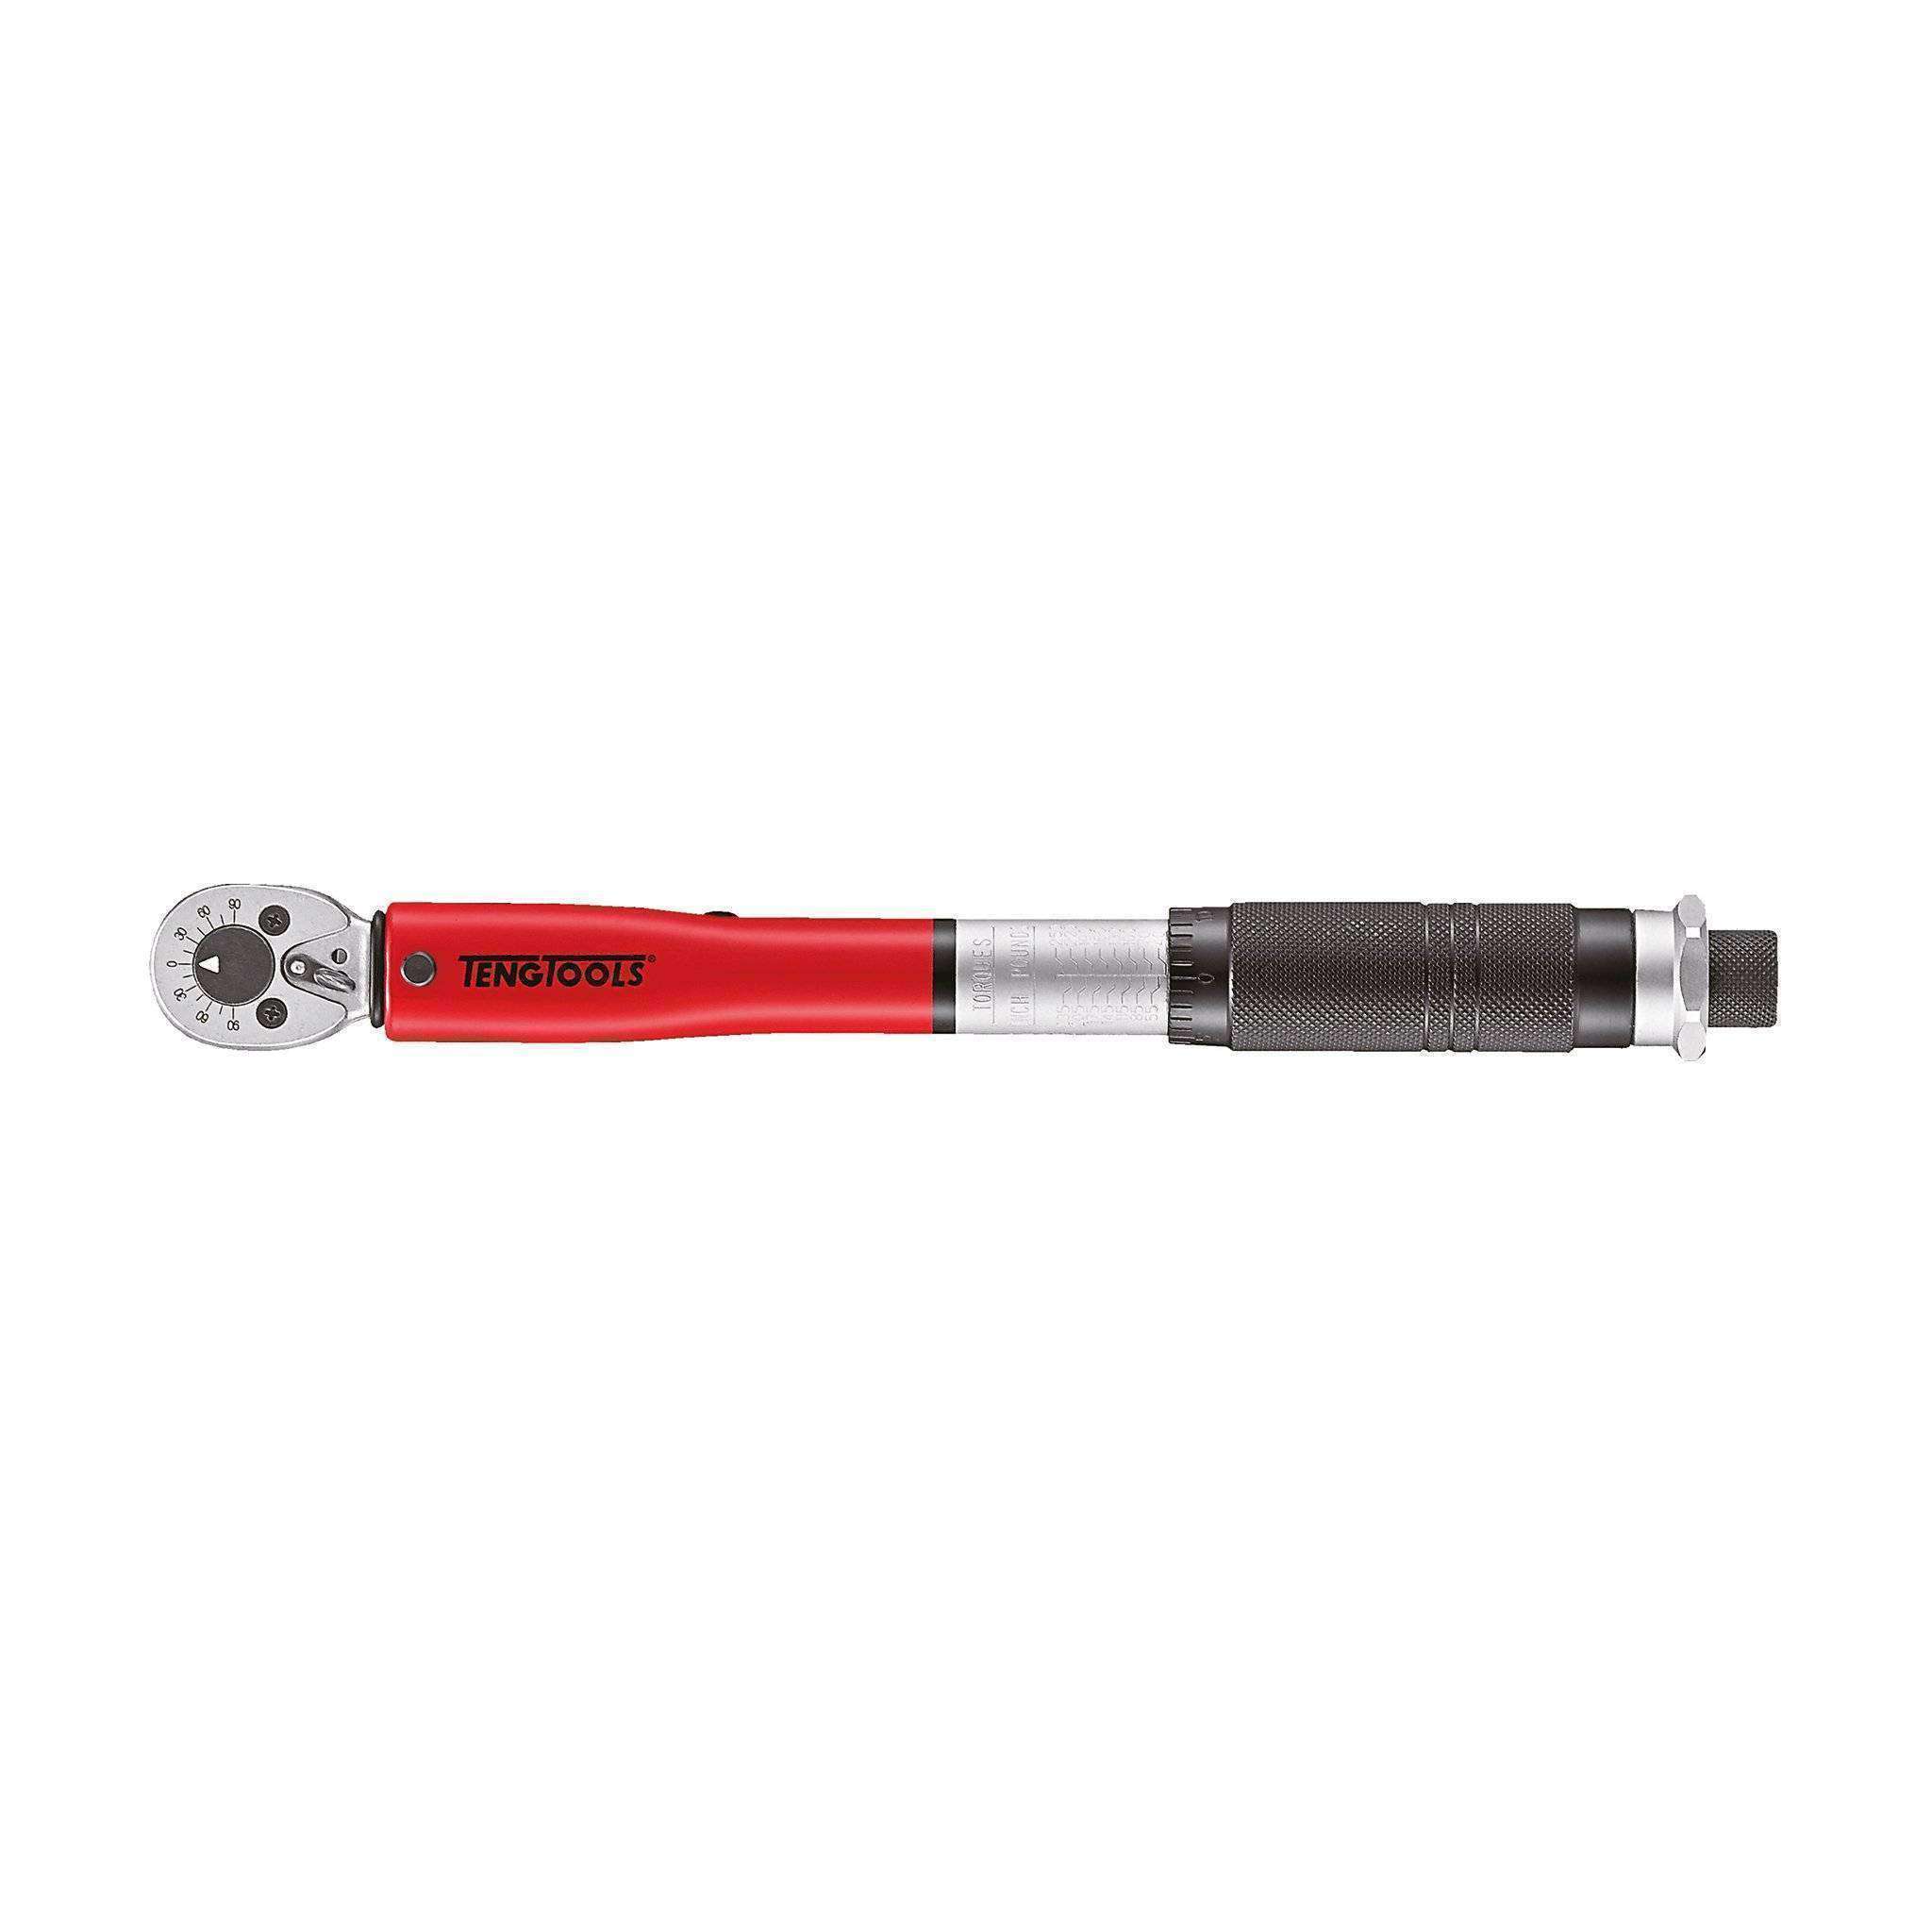 Teng Tools 1/4 Inch Drive Torque Wrench 40-250in-lb - 1492UAG-E